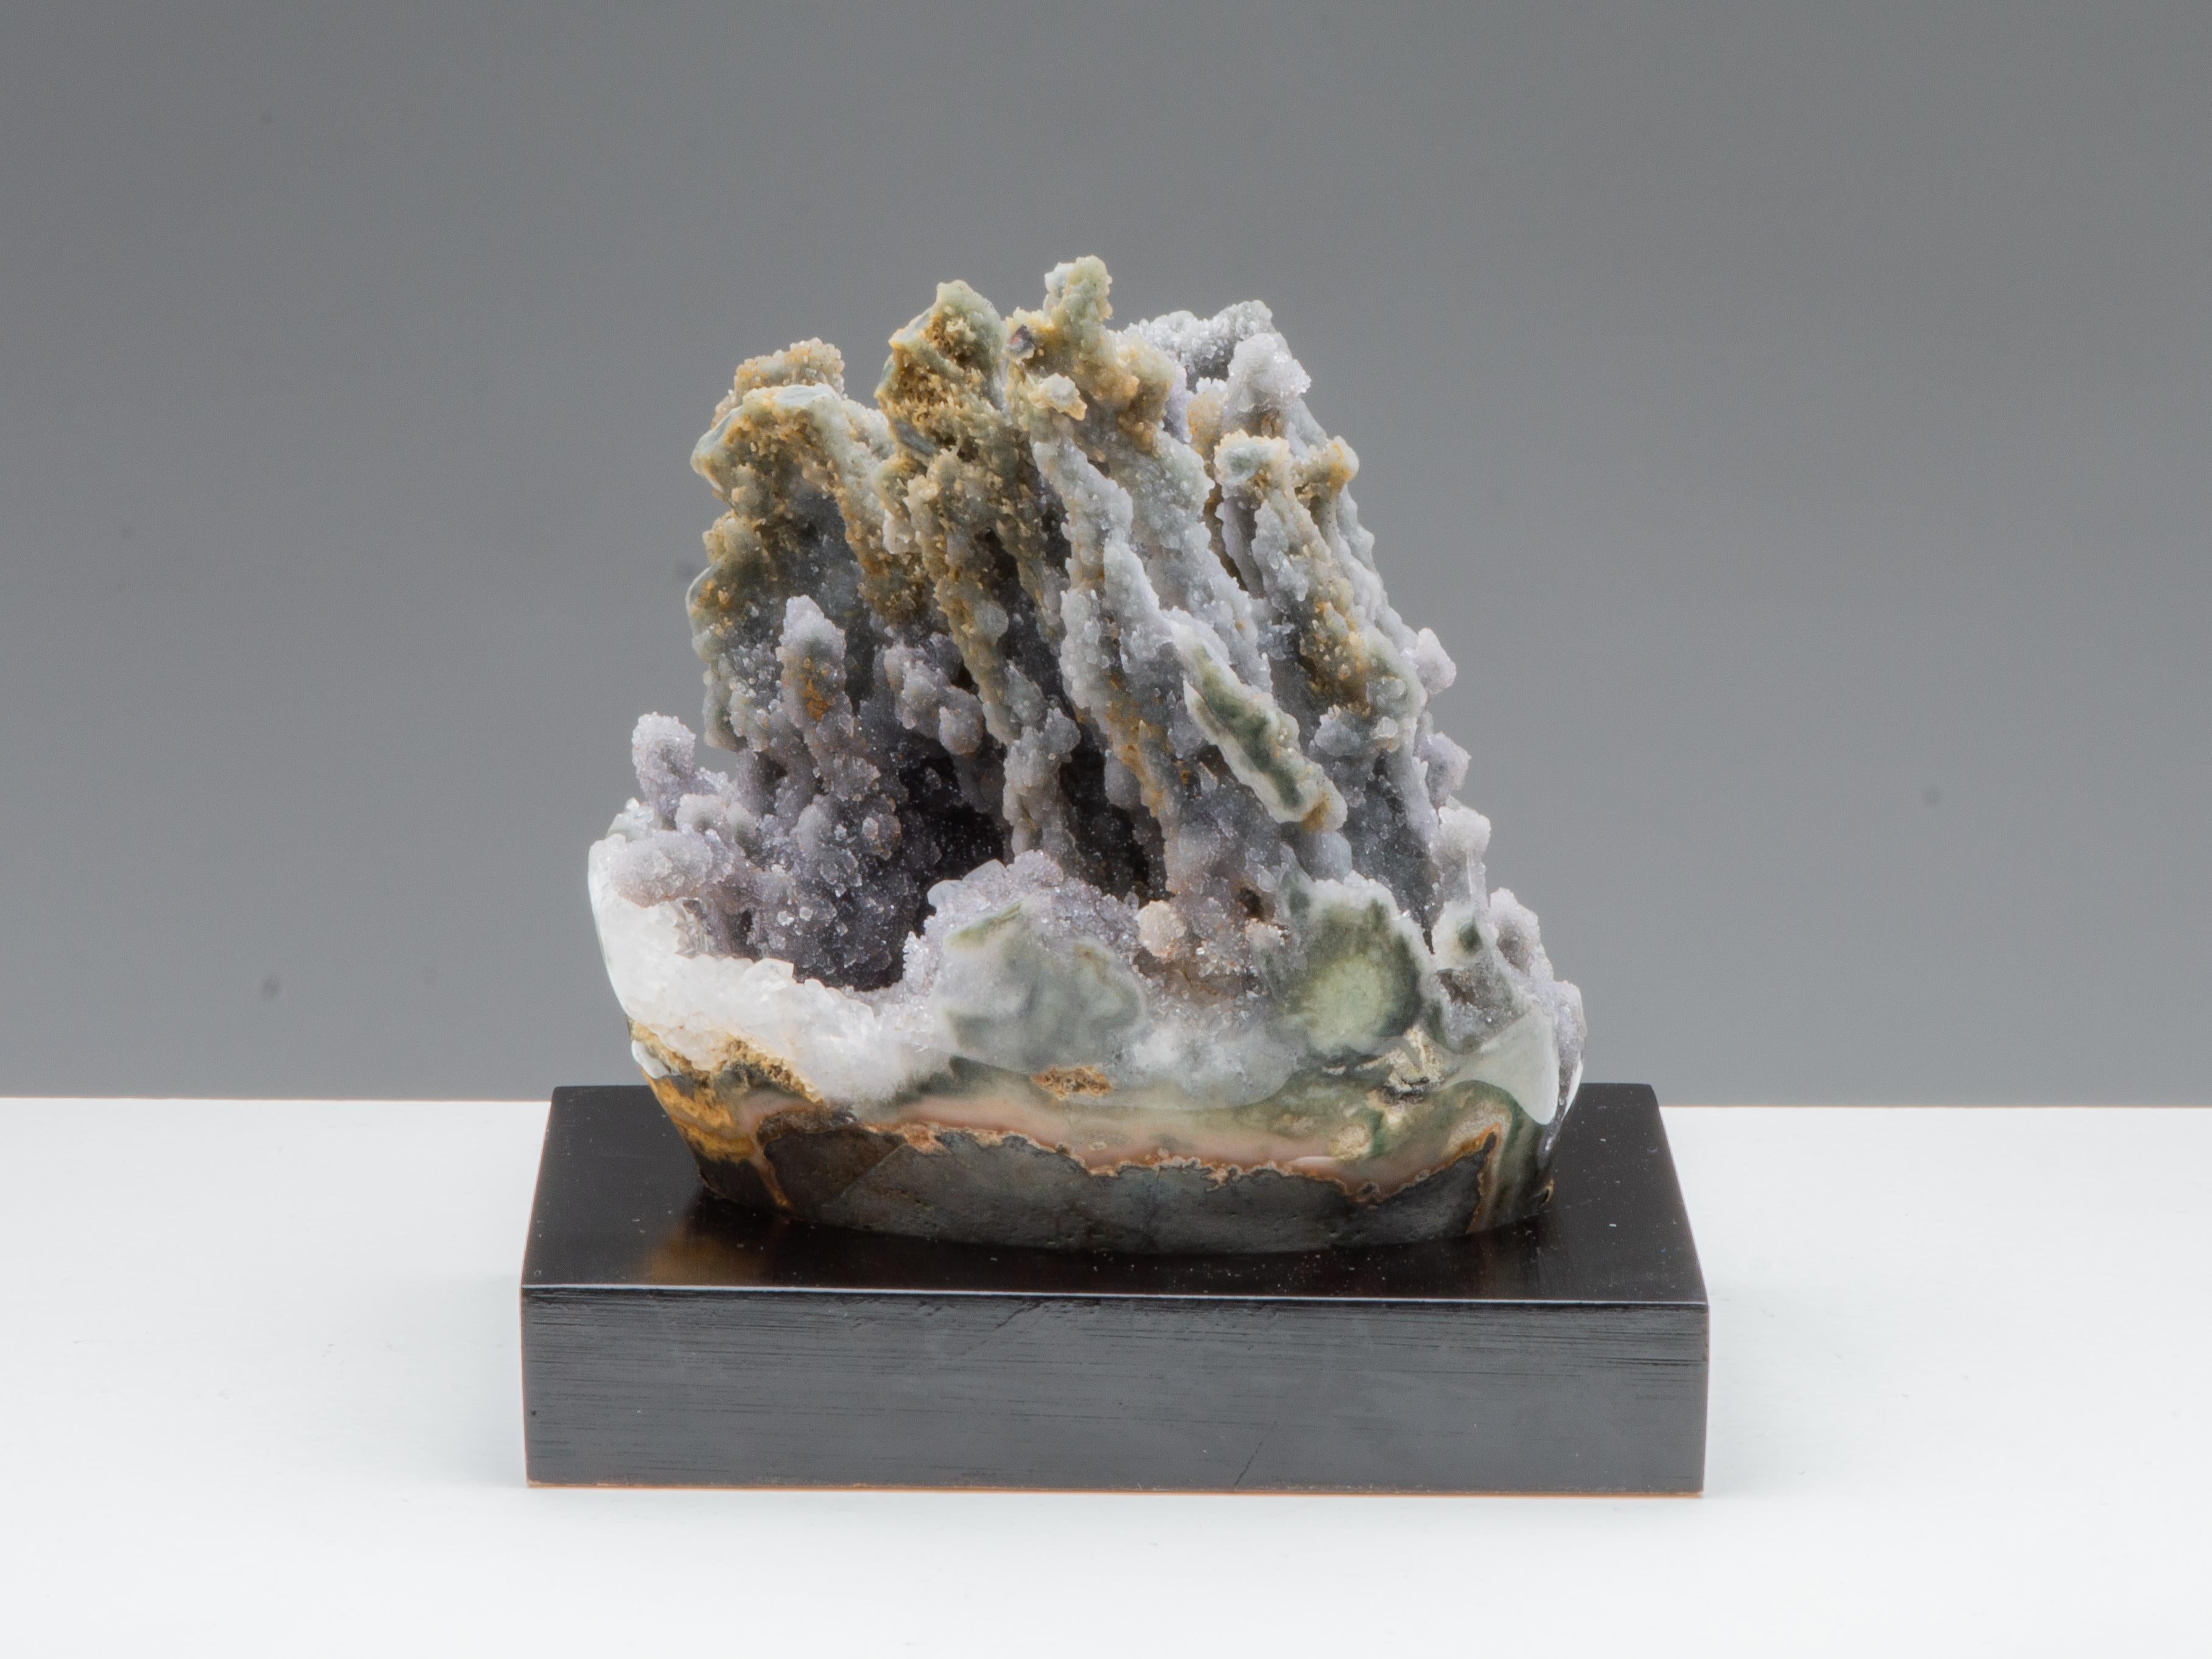 An unusual mineral formation of organic appearance. This piece is composed of light grey to green druze, with beautiful multiple stalactite formations and a blanket of white quartz.

The edges of this beautiful mineralogical piece have been